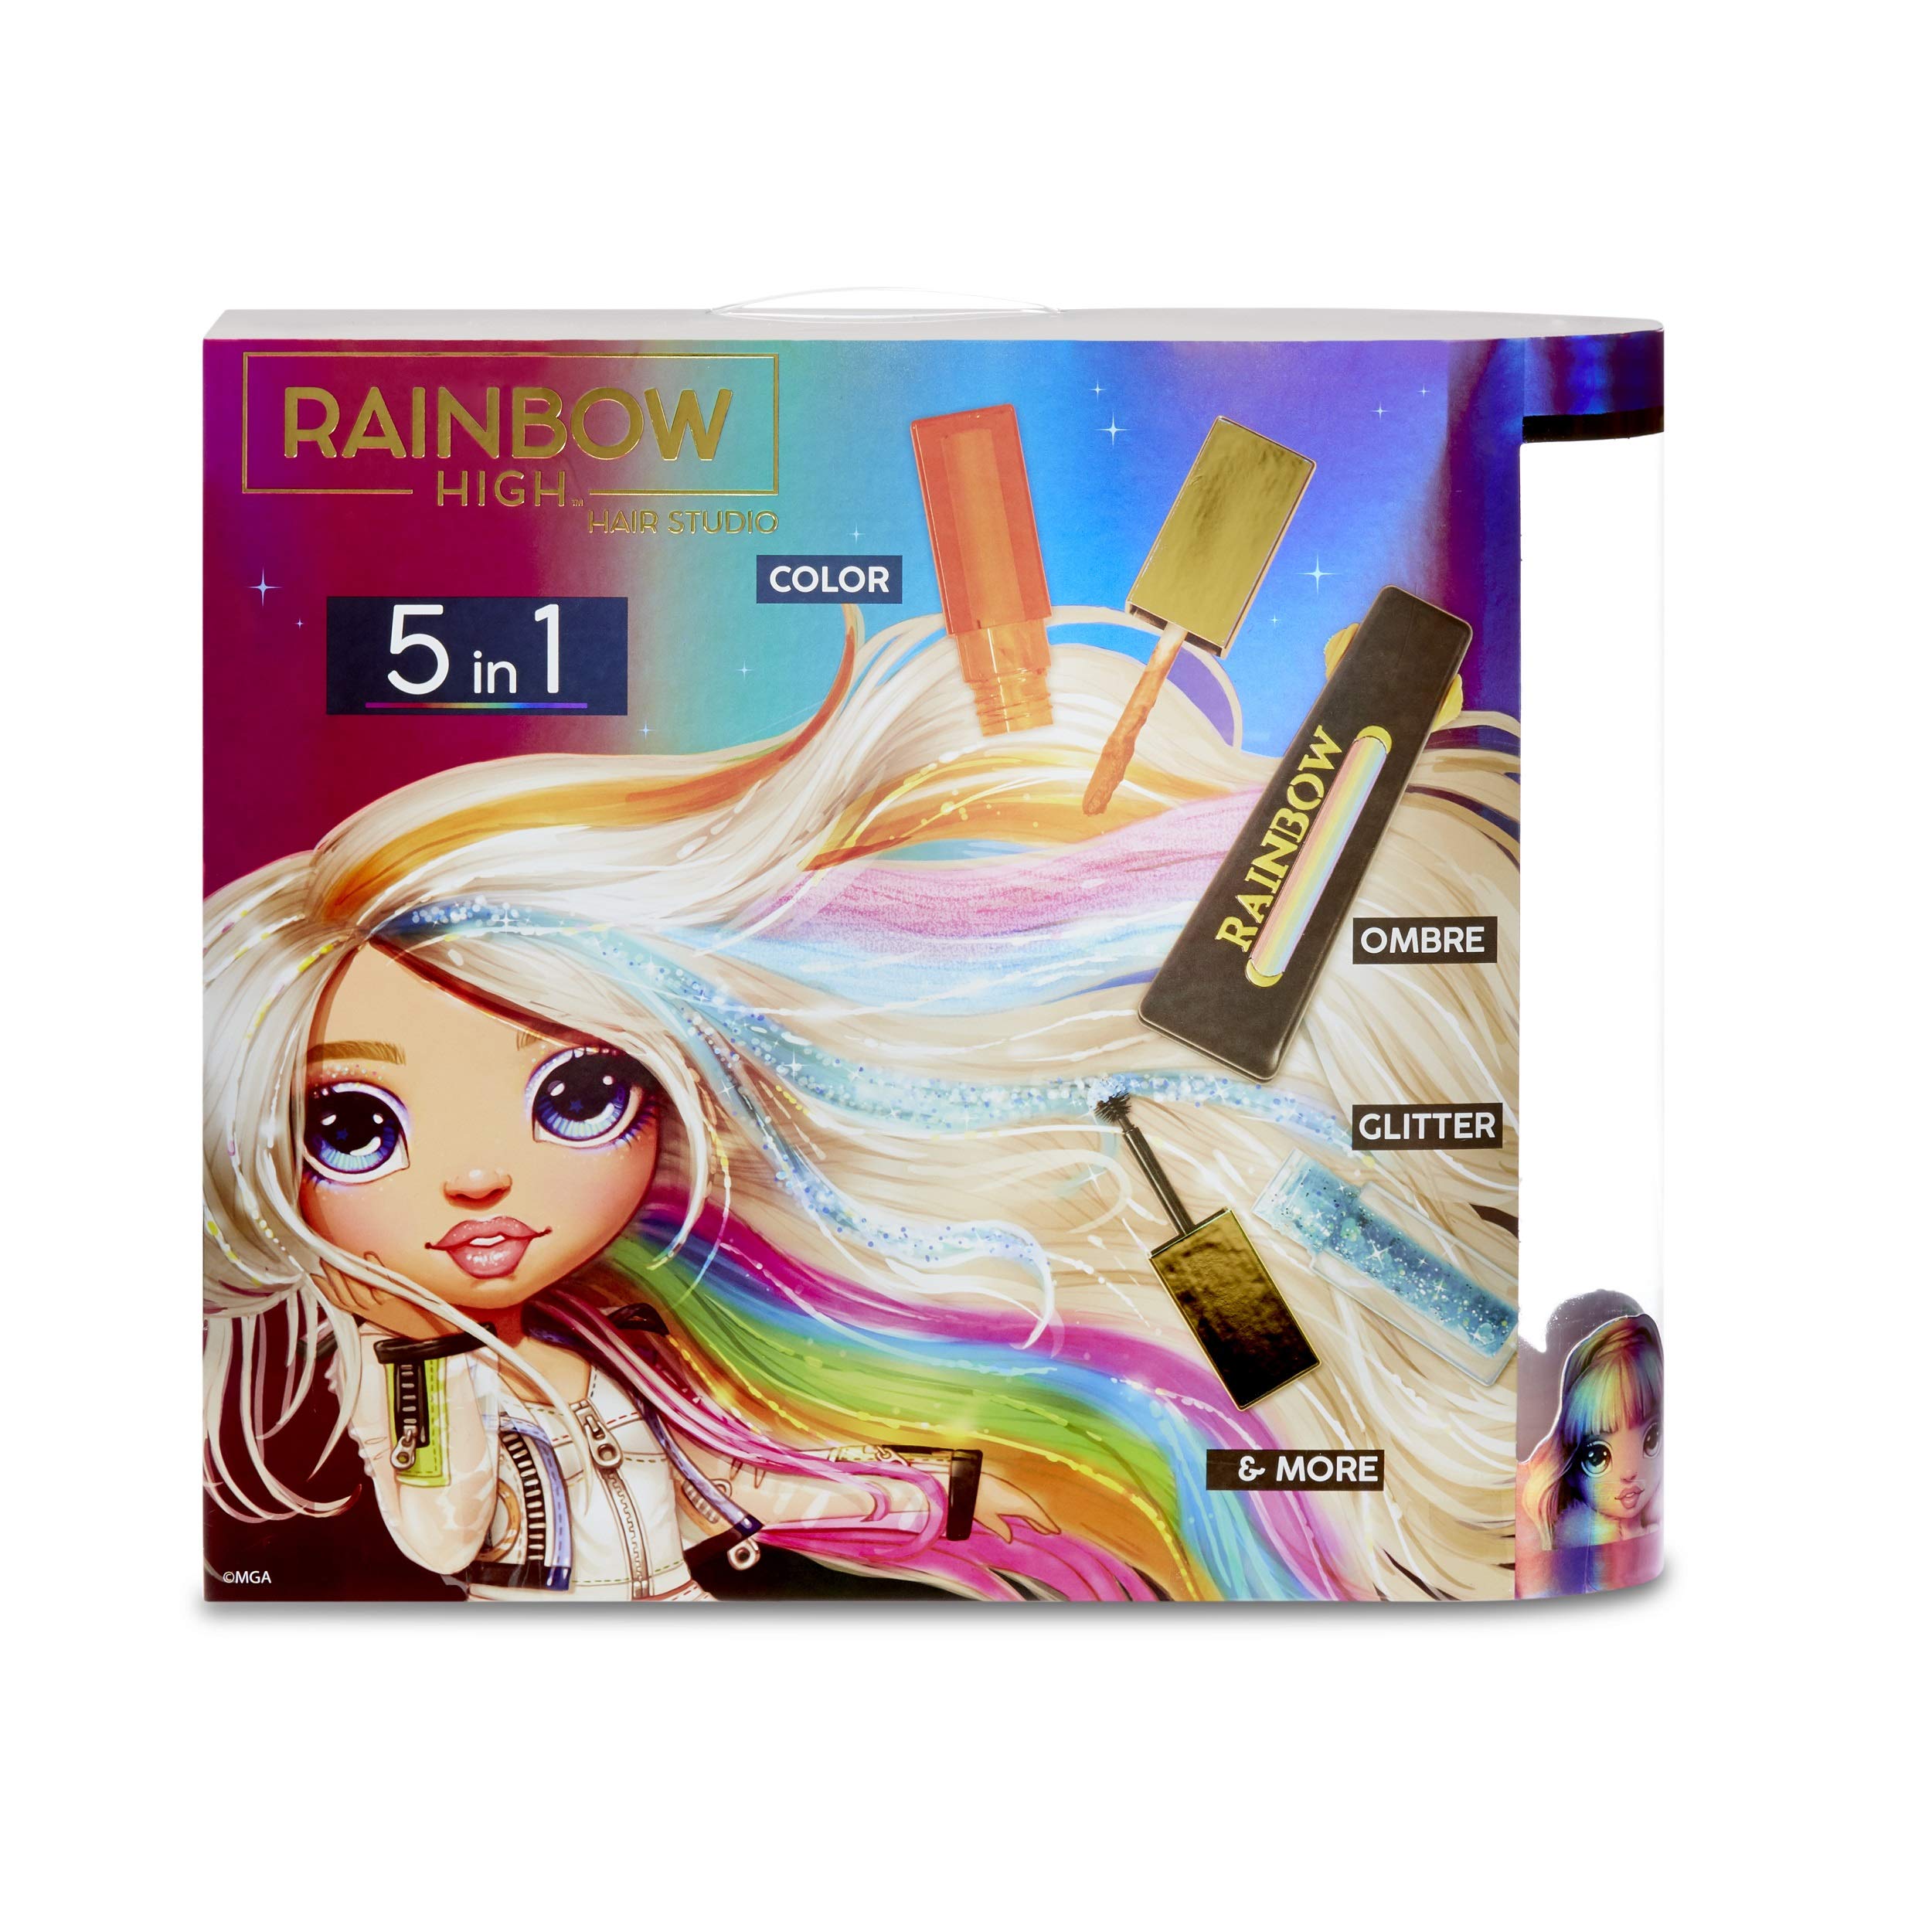 Rainbow High Hair Studio – Create Rainbow Hair with Exclusive Doll, Extra - Long Washable Hair Color & Complete Doll Clothes and Accessories- Fun Playset for Kids Ages 4+